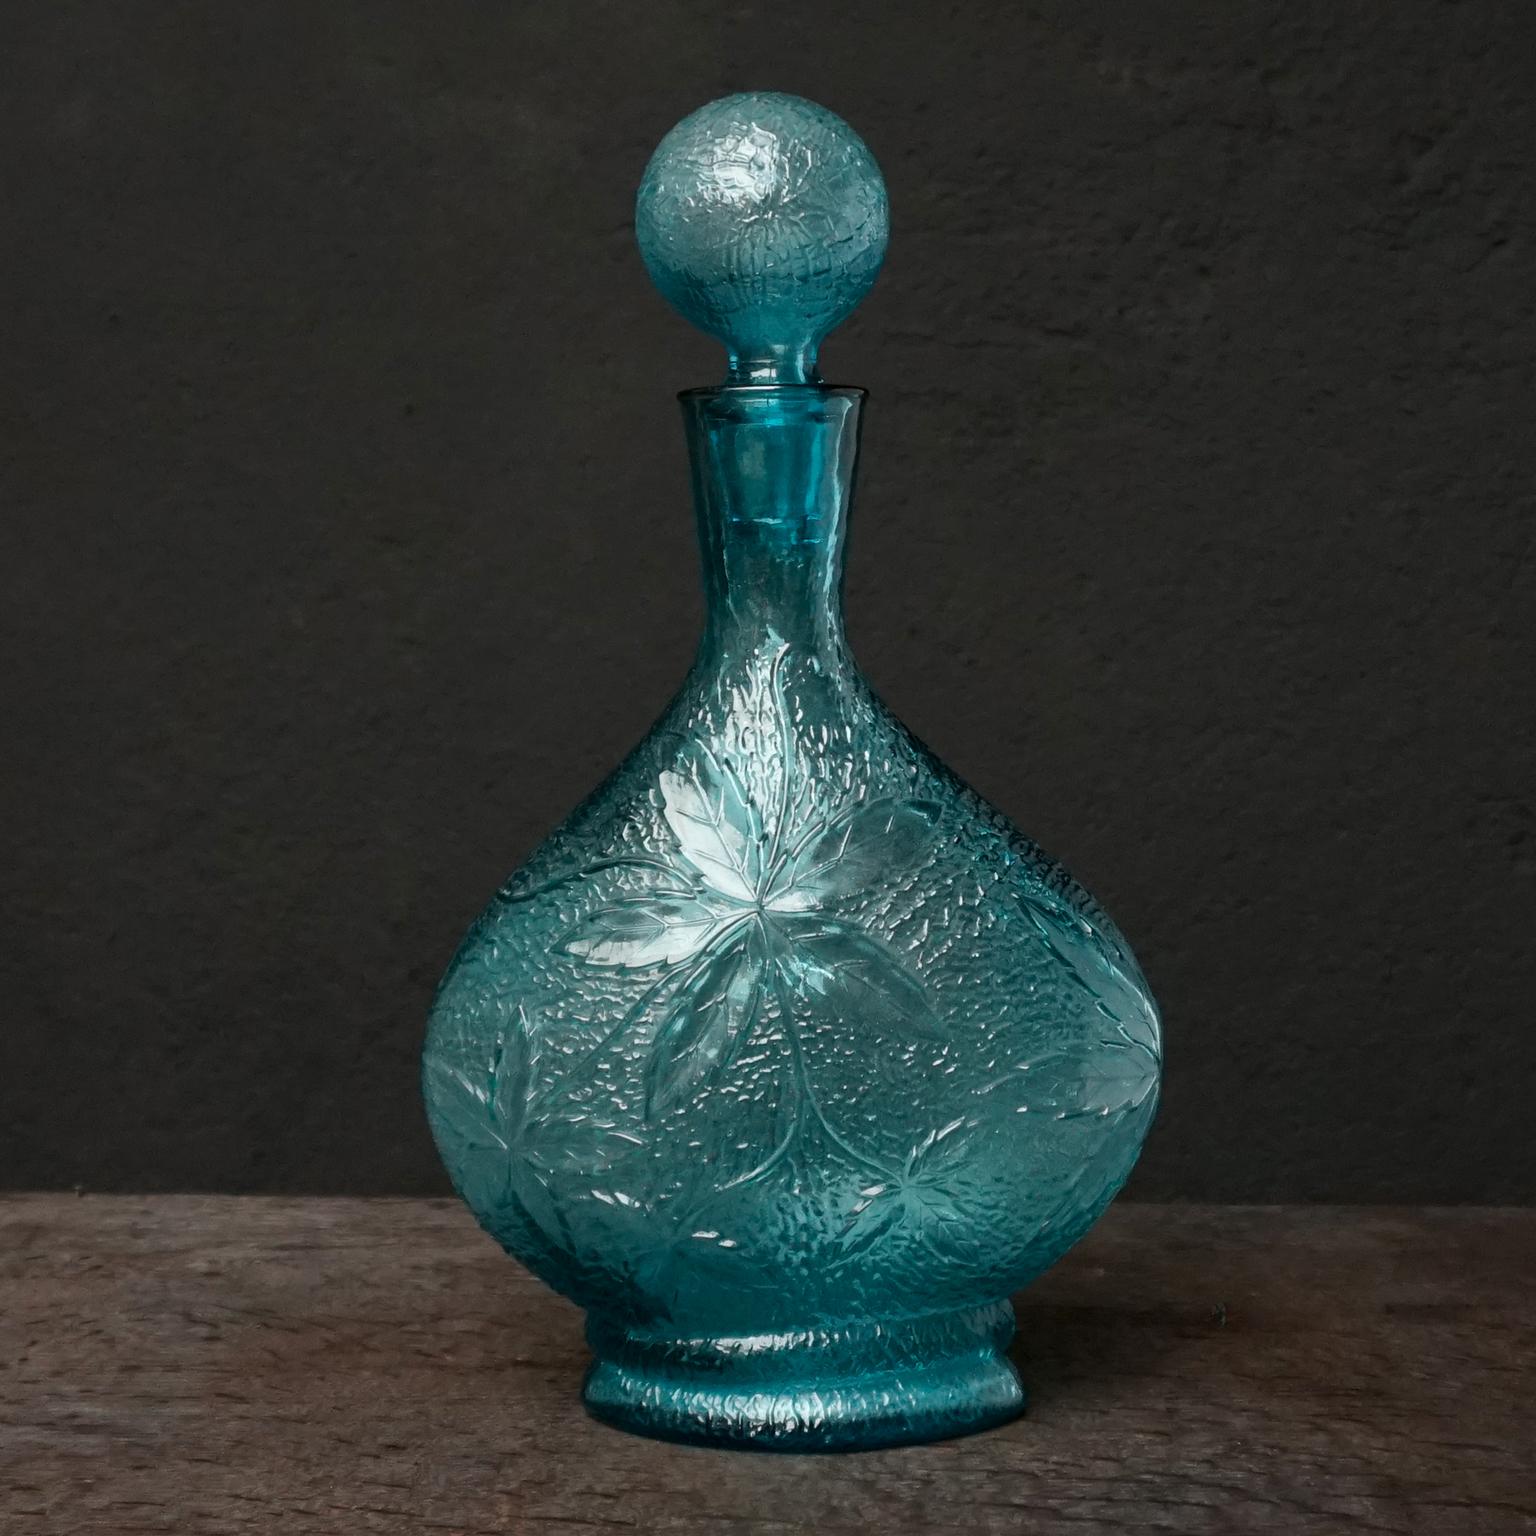 1960s Italian bright blue pressed Midcentury Modern Empoli Art-Glass carafe with leaf print and ball stopper.

Mention Italian glass and probably everyone’s mind immediately leaps to Venice and Murano.
But there is another almost equally famous